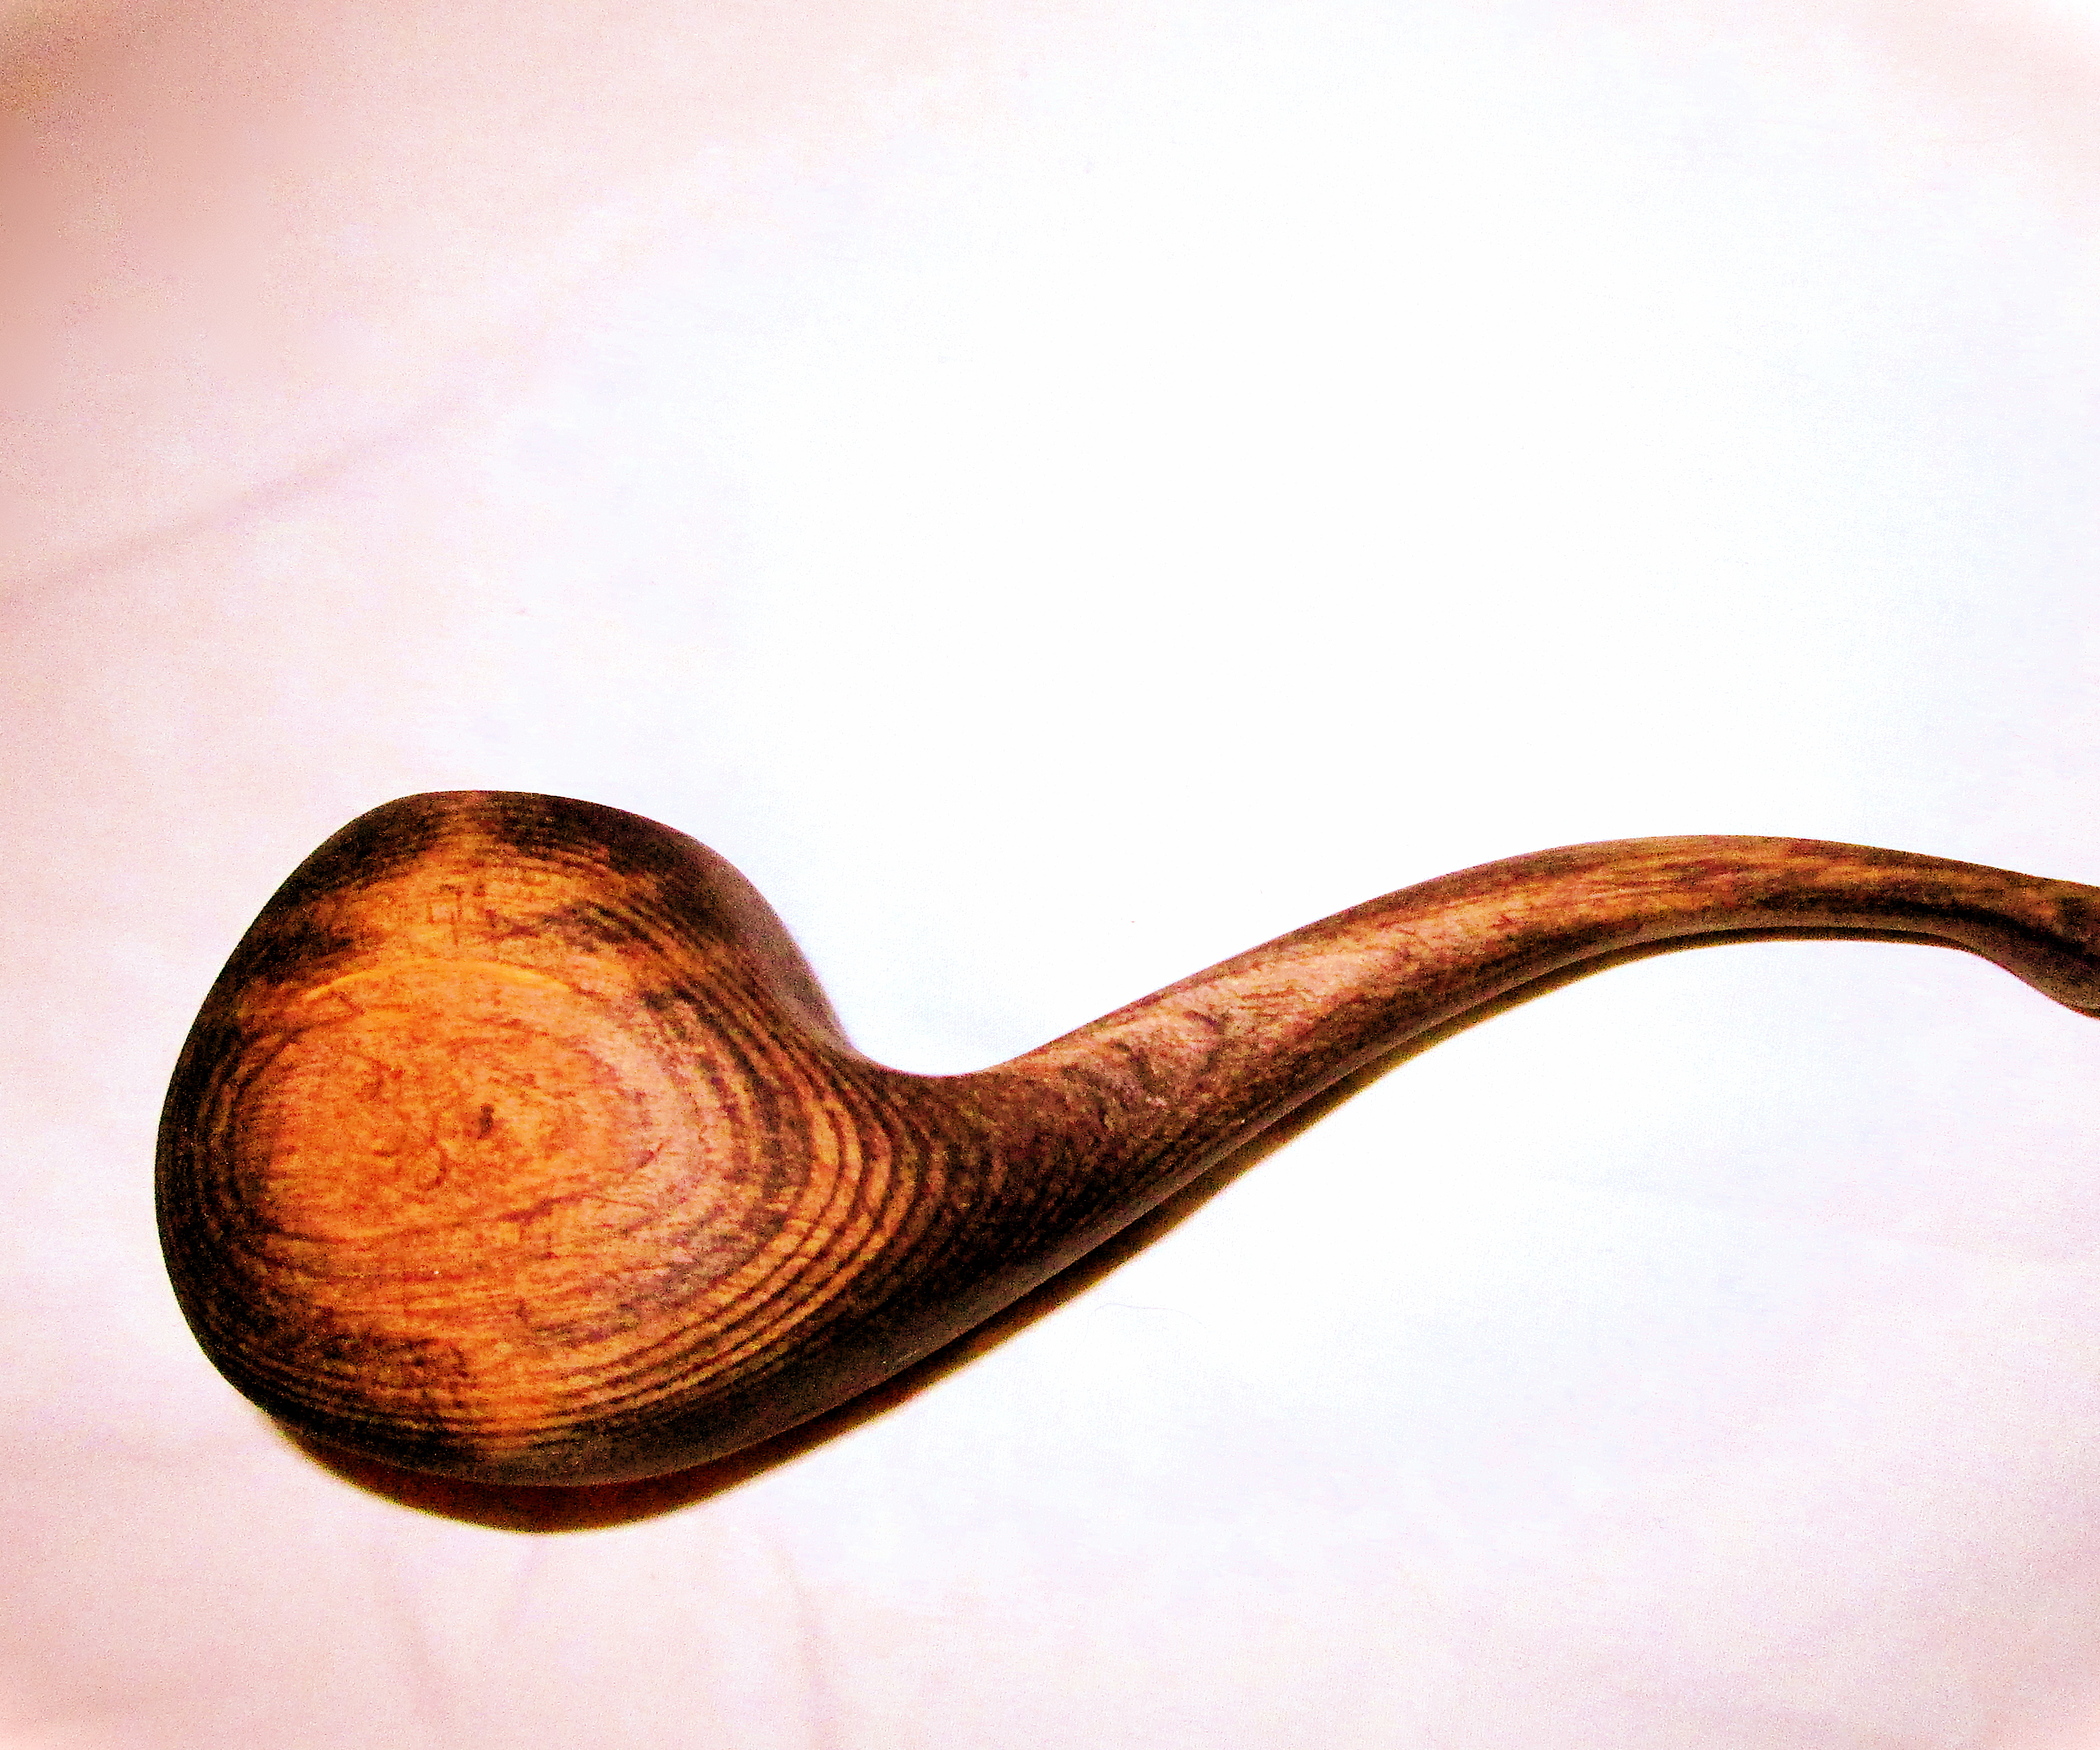 How to Make a Wooden Smoking Pipe